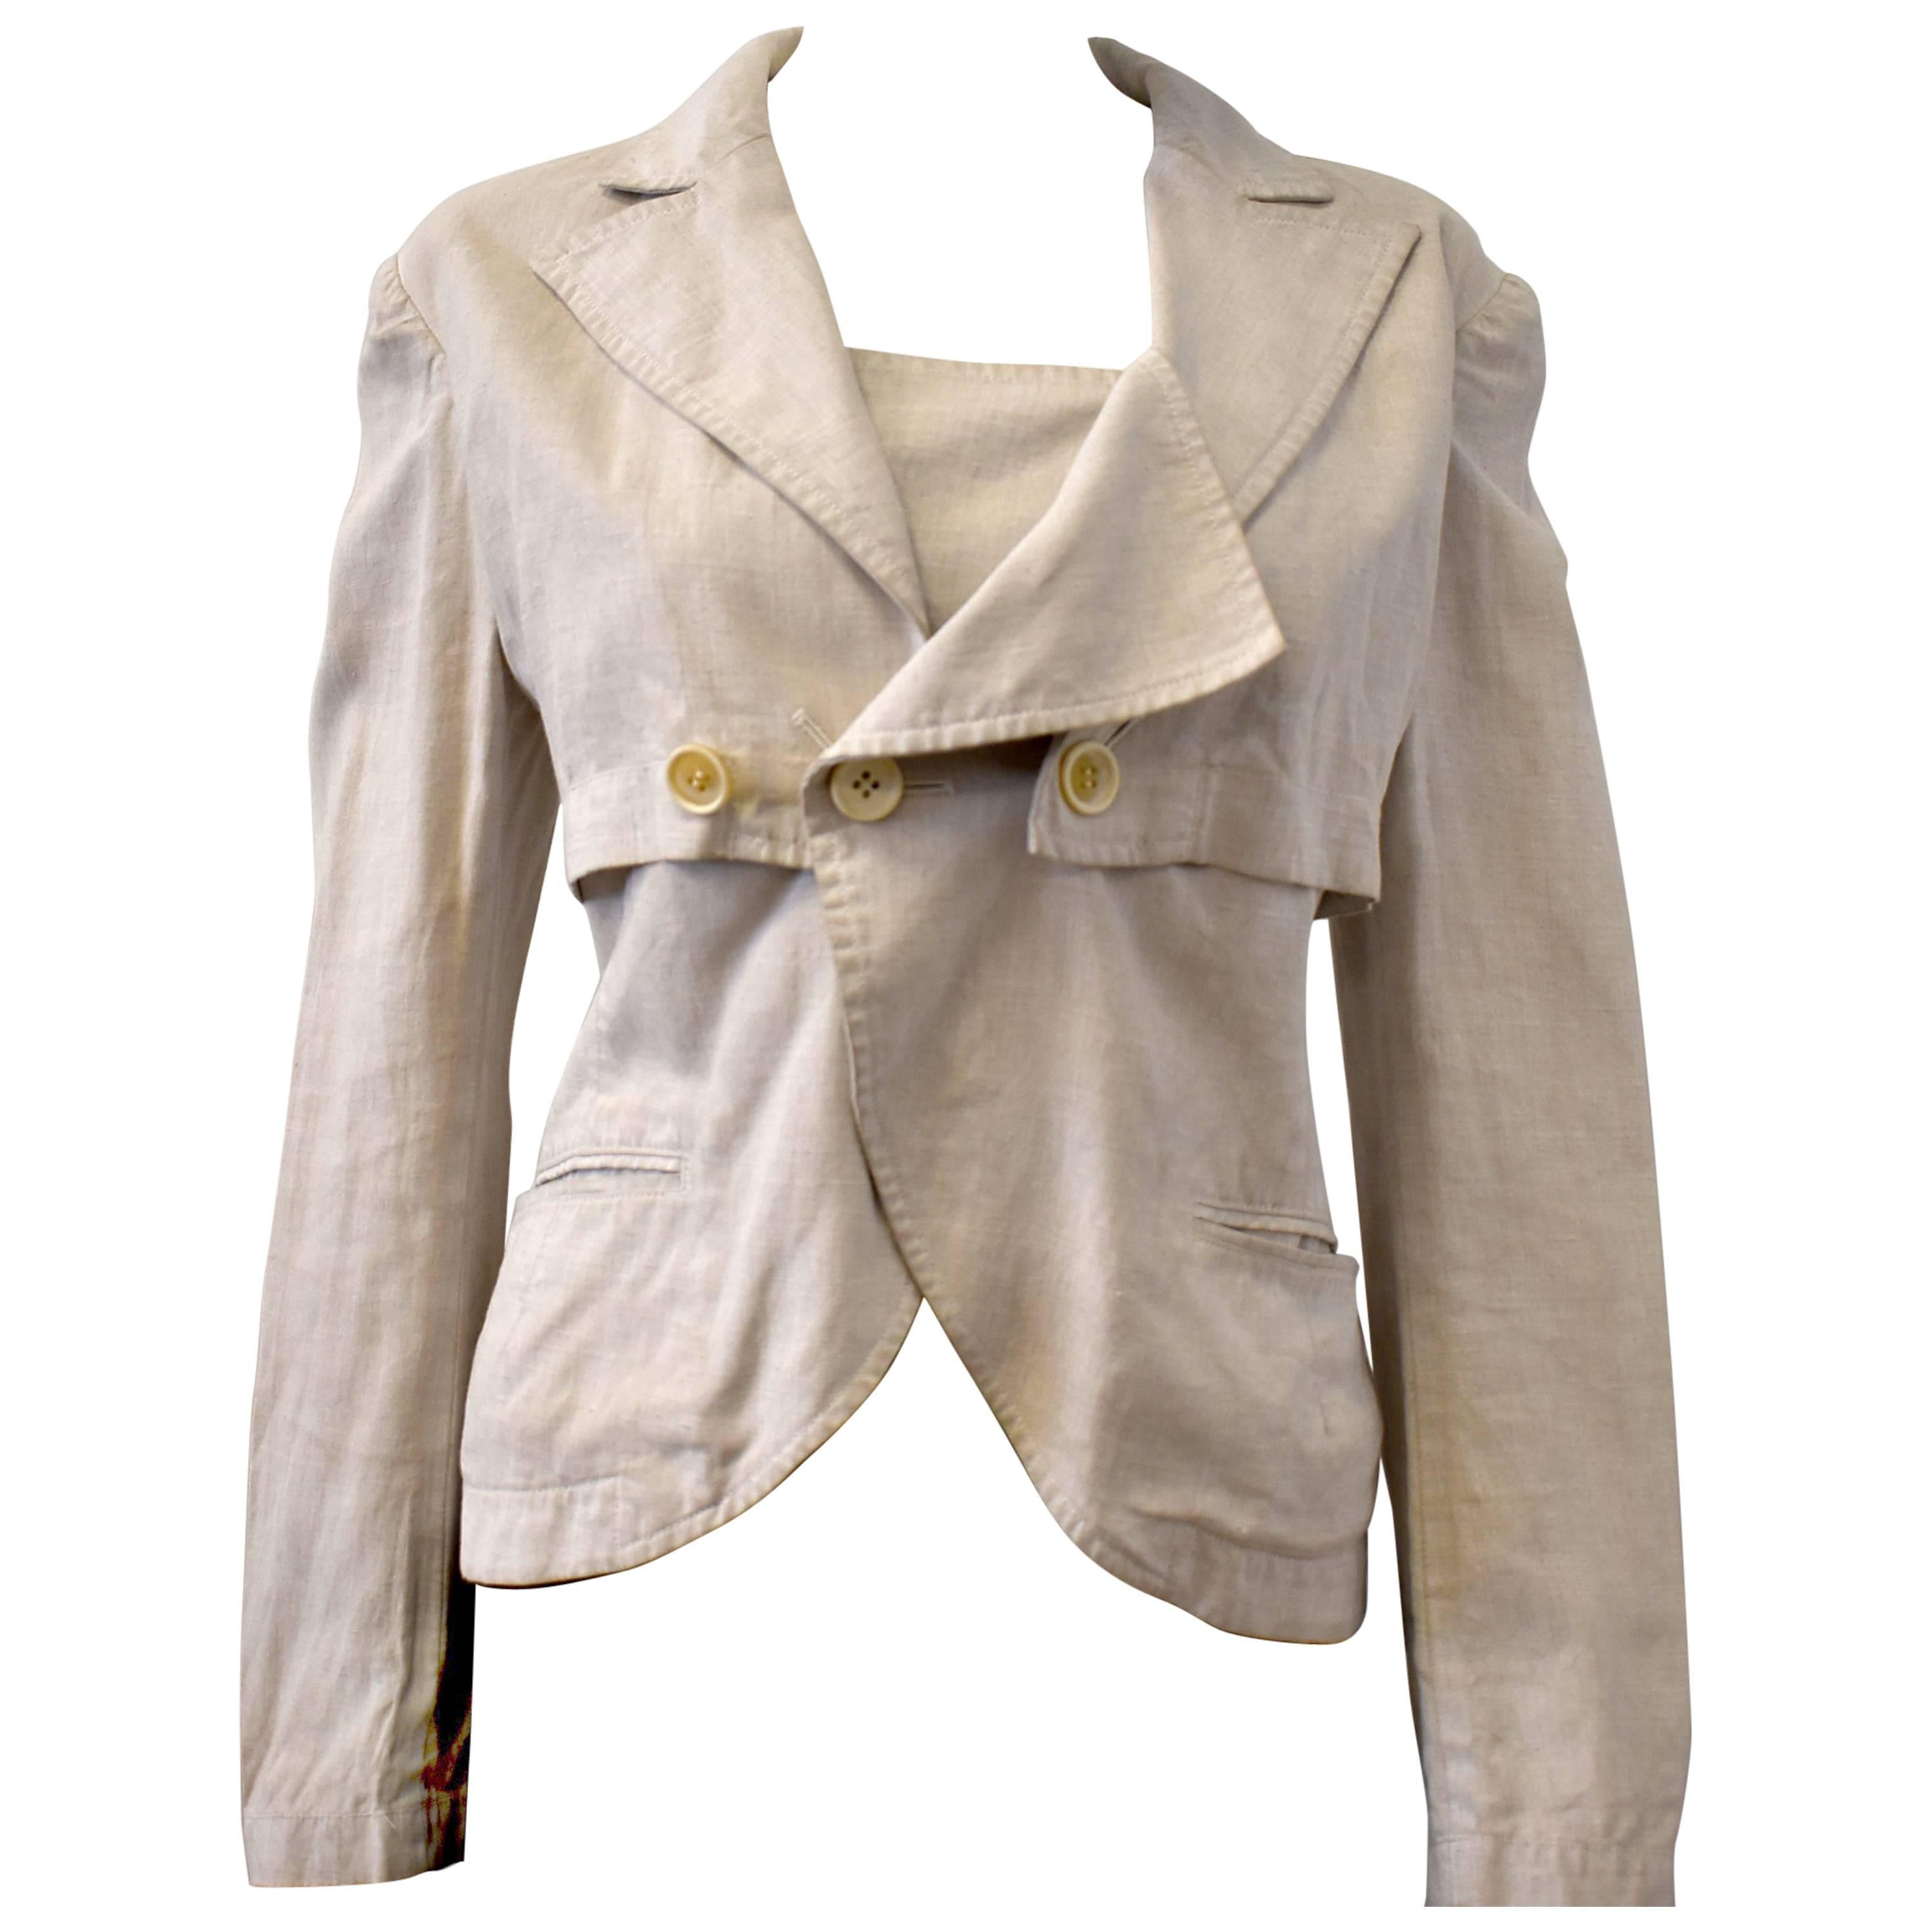 Yohji Yamamoto Y’s Linen Jacket with Folded Collar and Panel Details For Sale